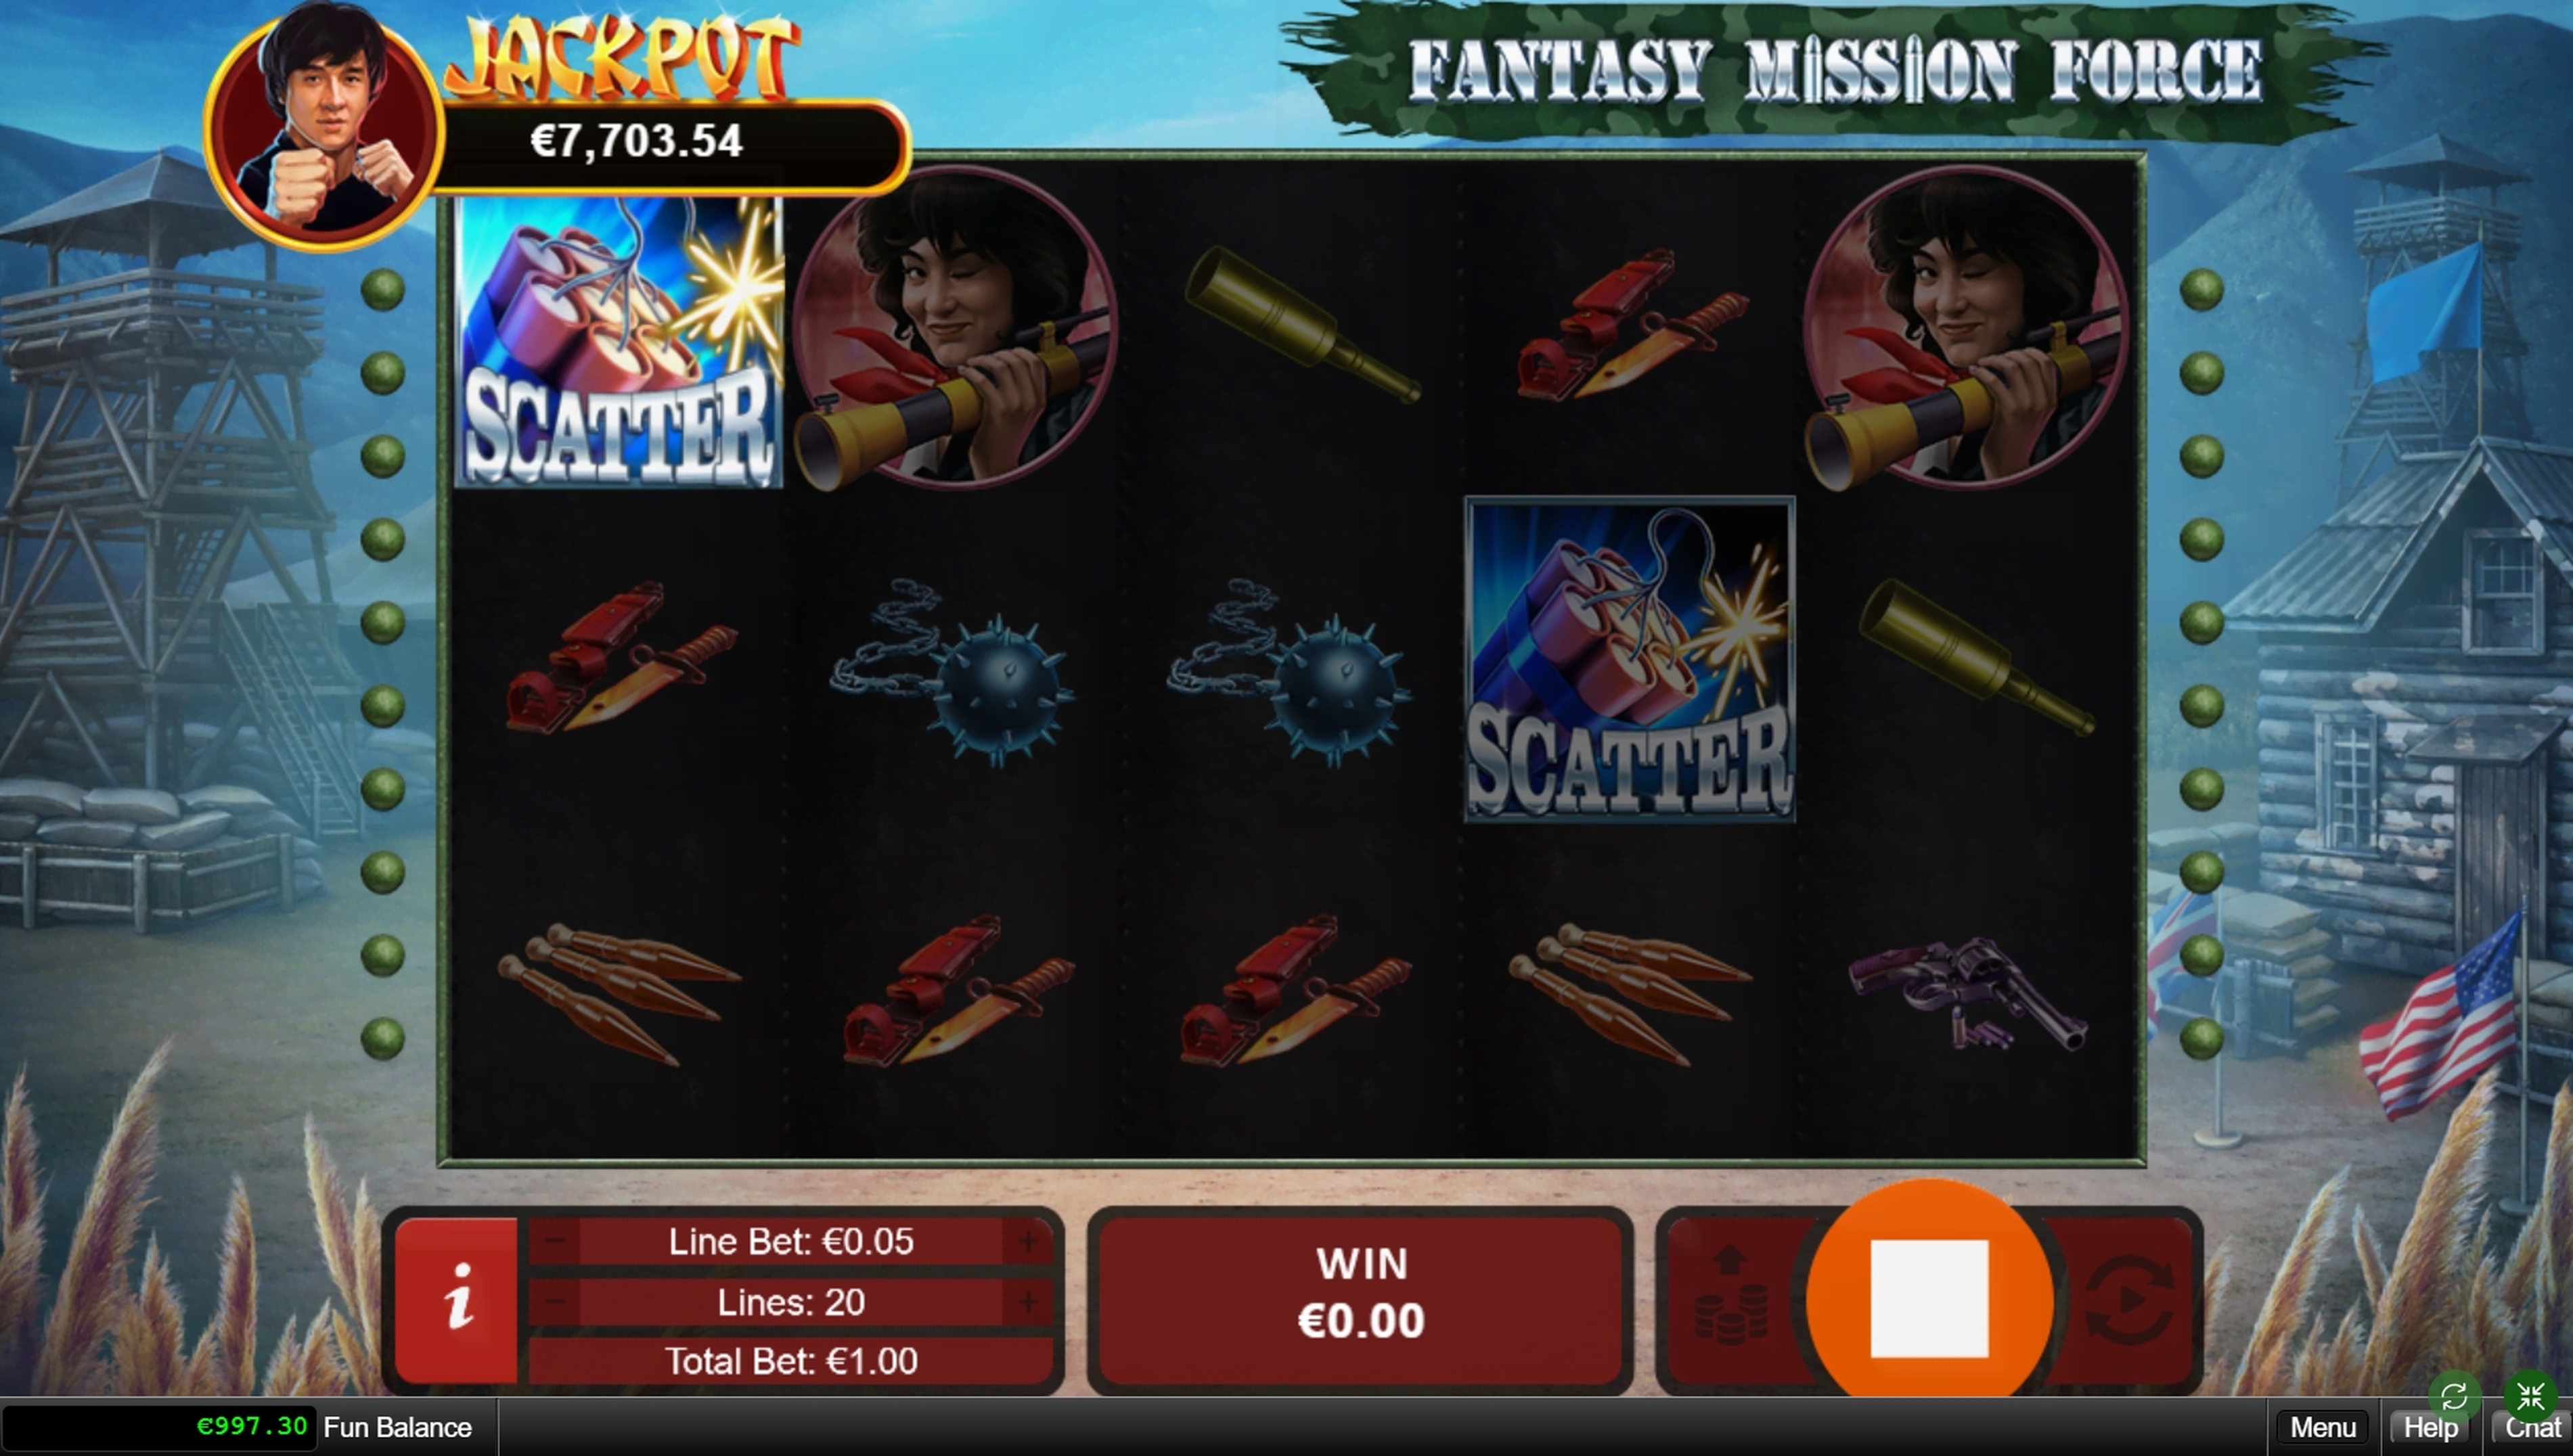 Win Money in Fantasy Mission Force Free Slot Game by Real Time Gaming